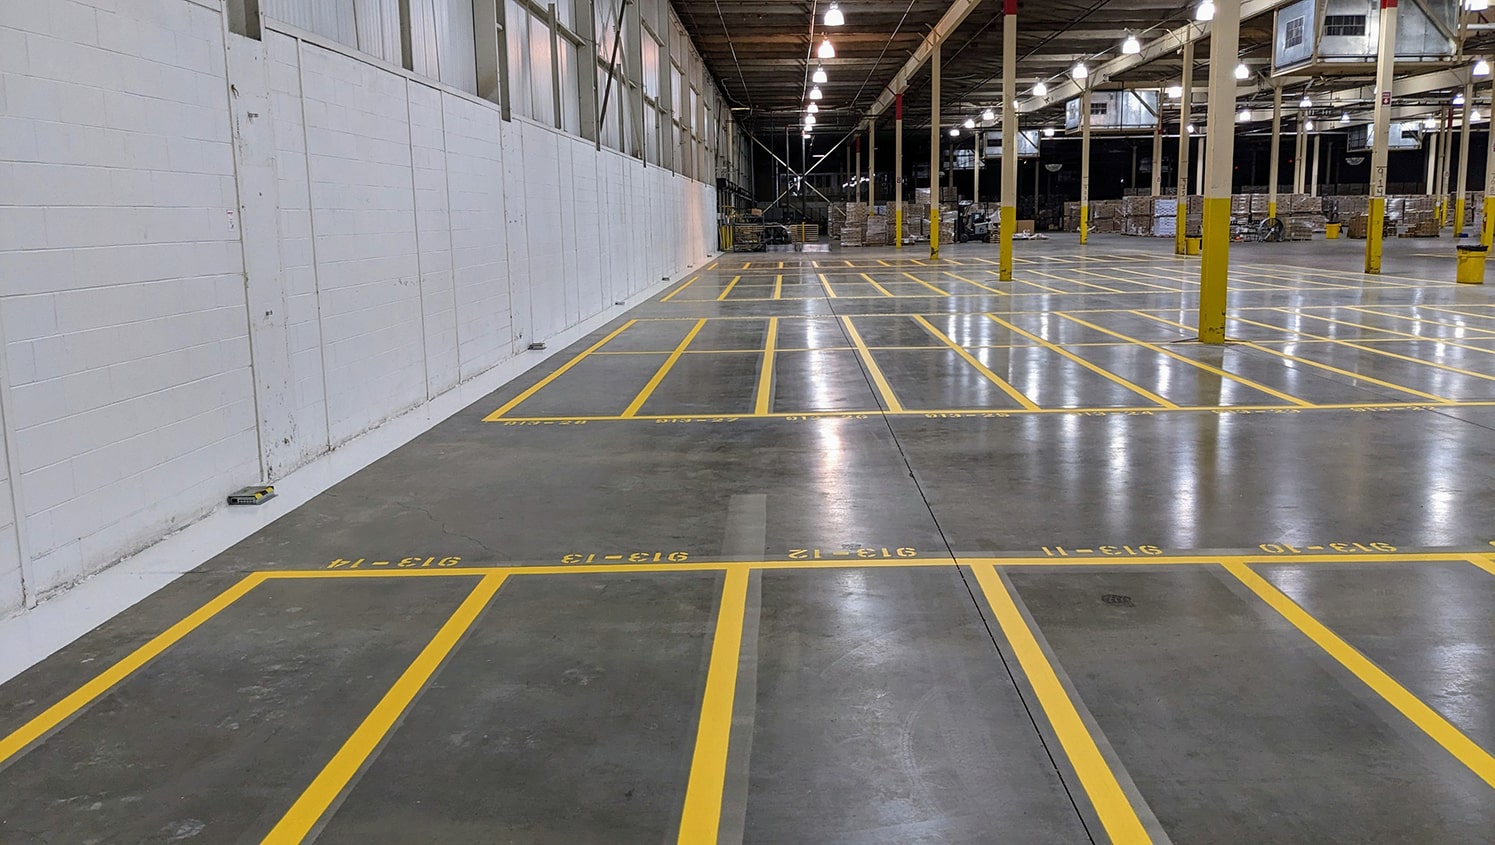 newly striped rows of warehouse markings